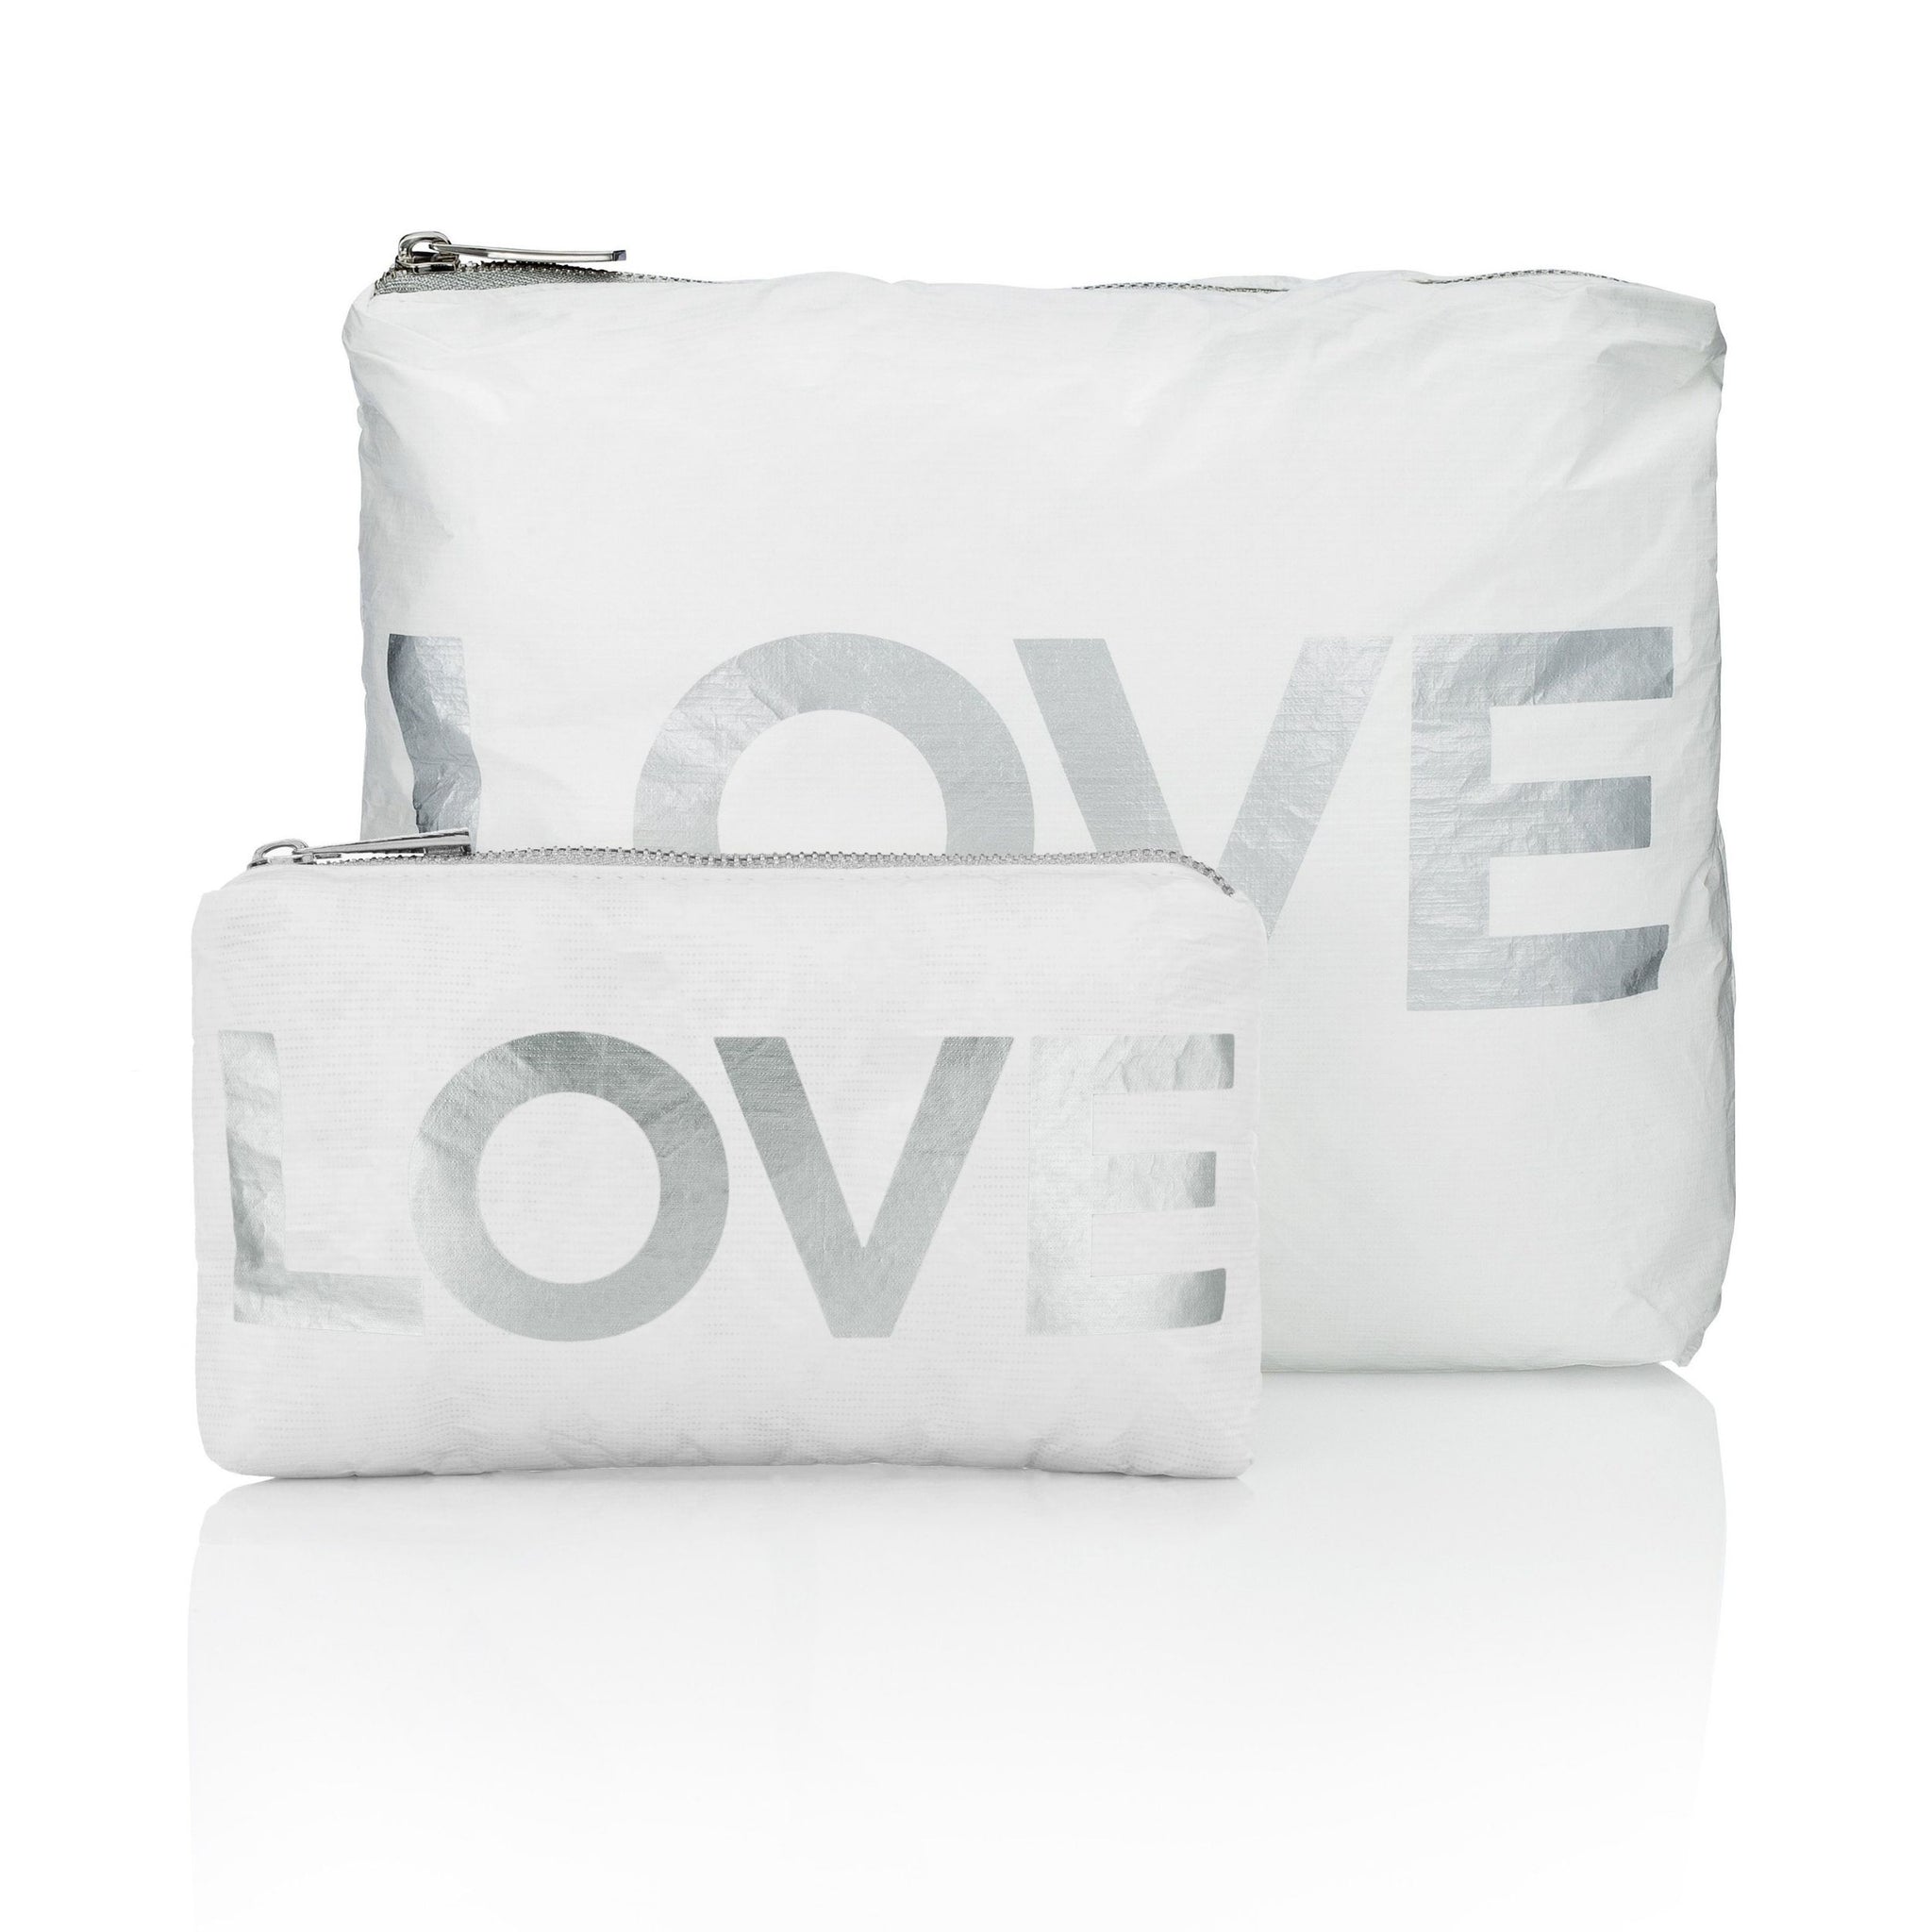 Set of Two - Organizational Packs - Shimmer White with Silver "LOVE"